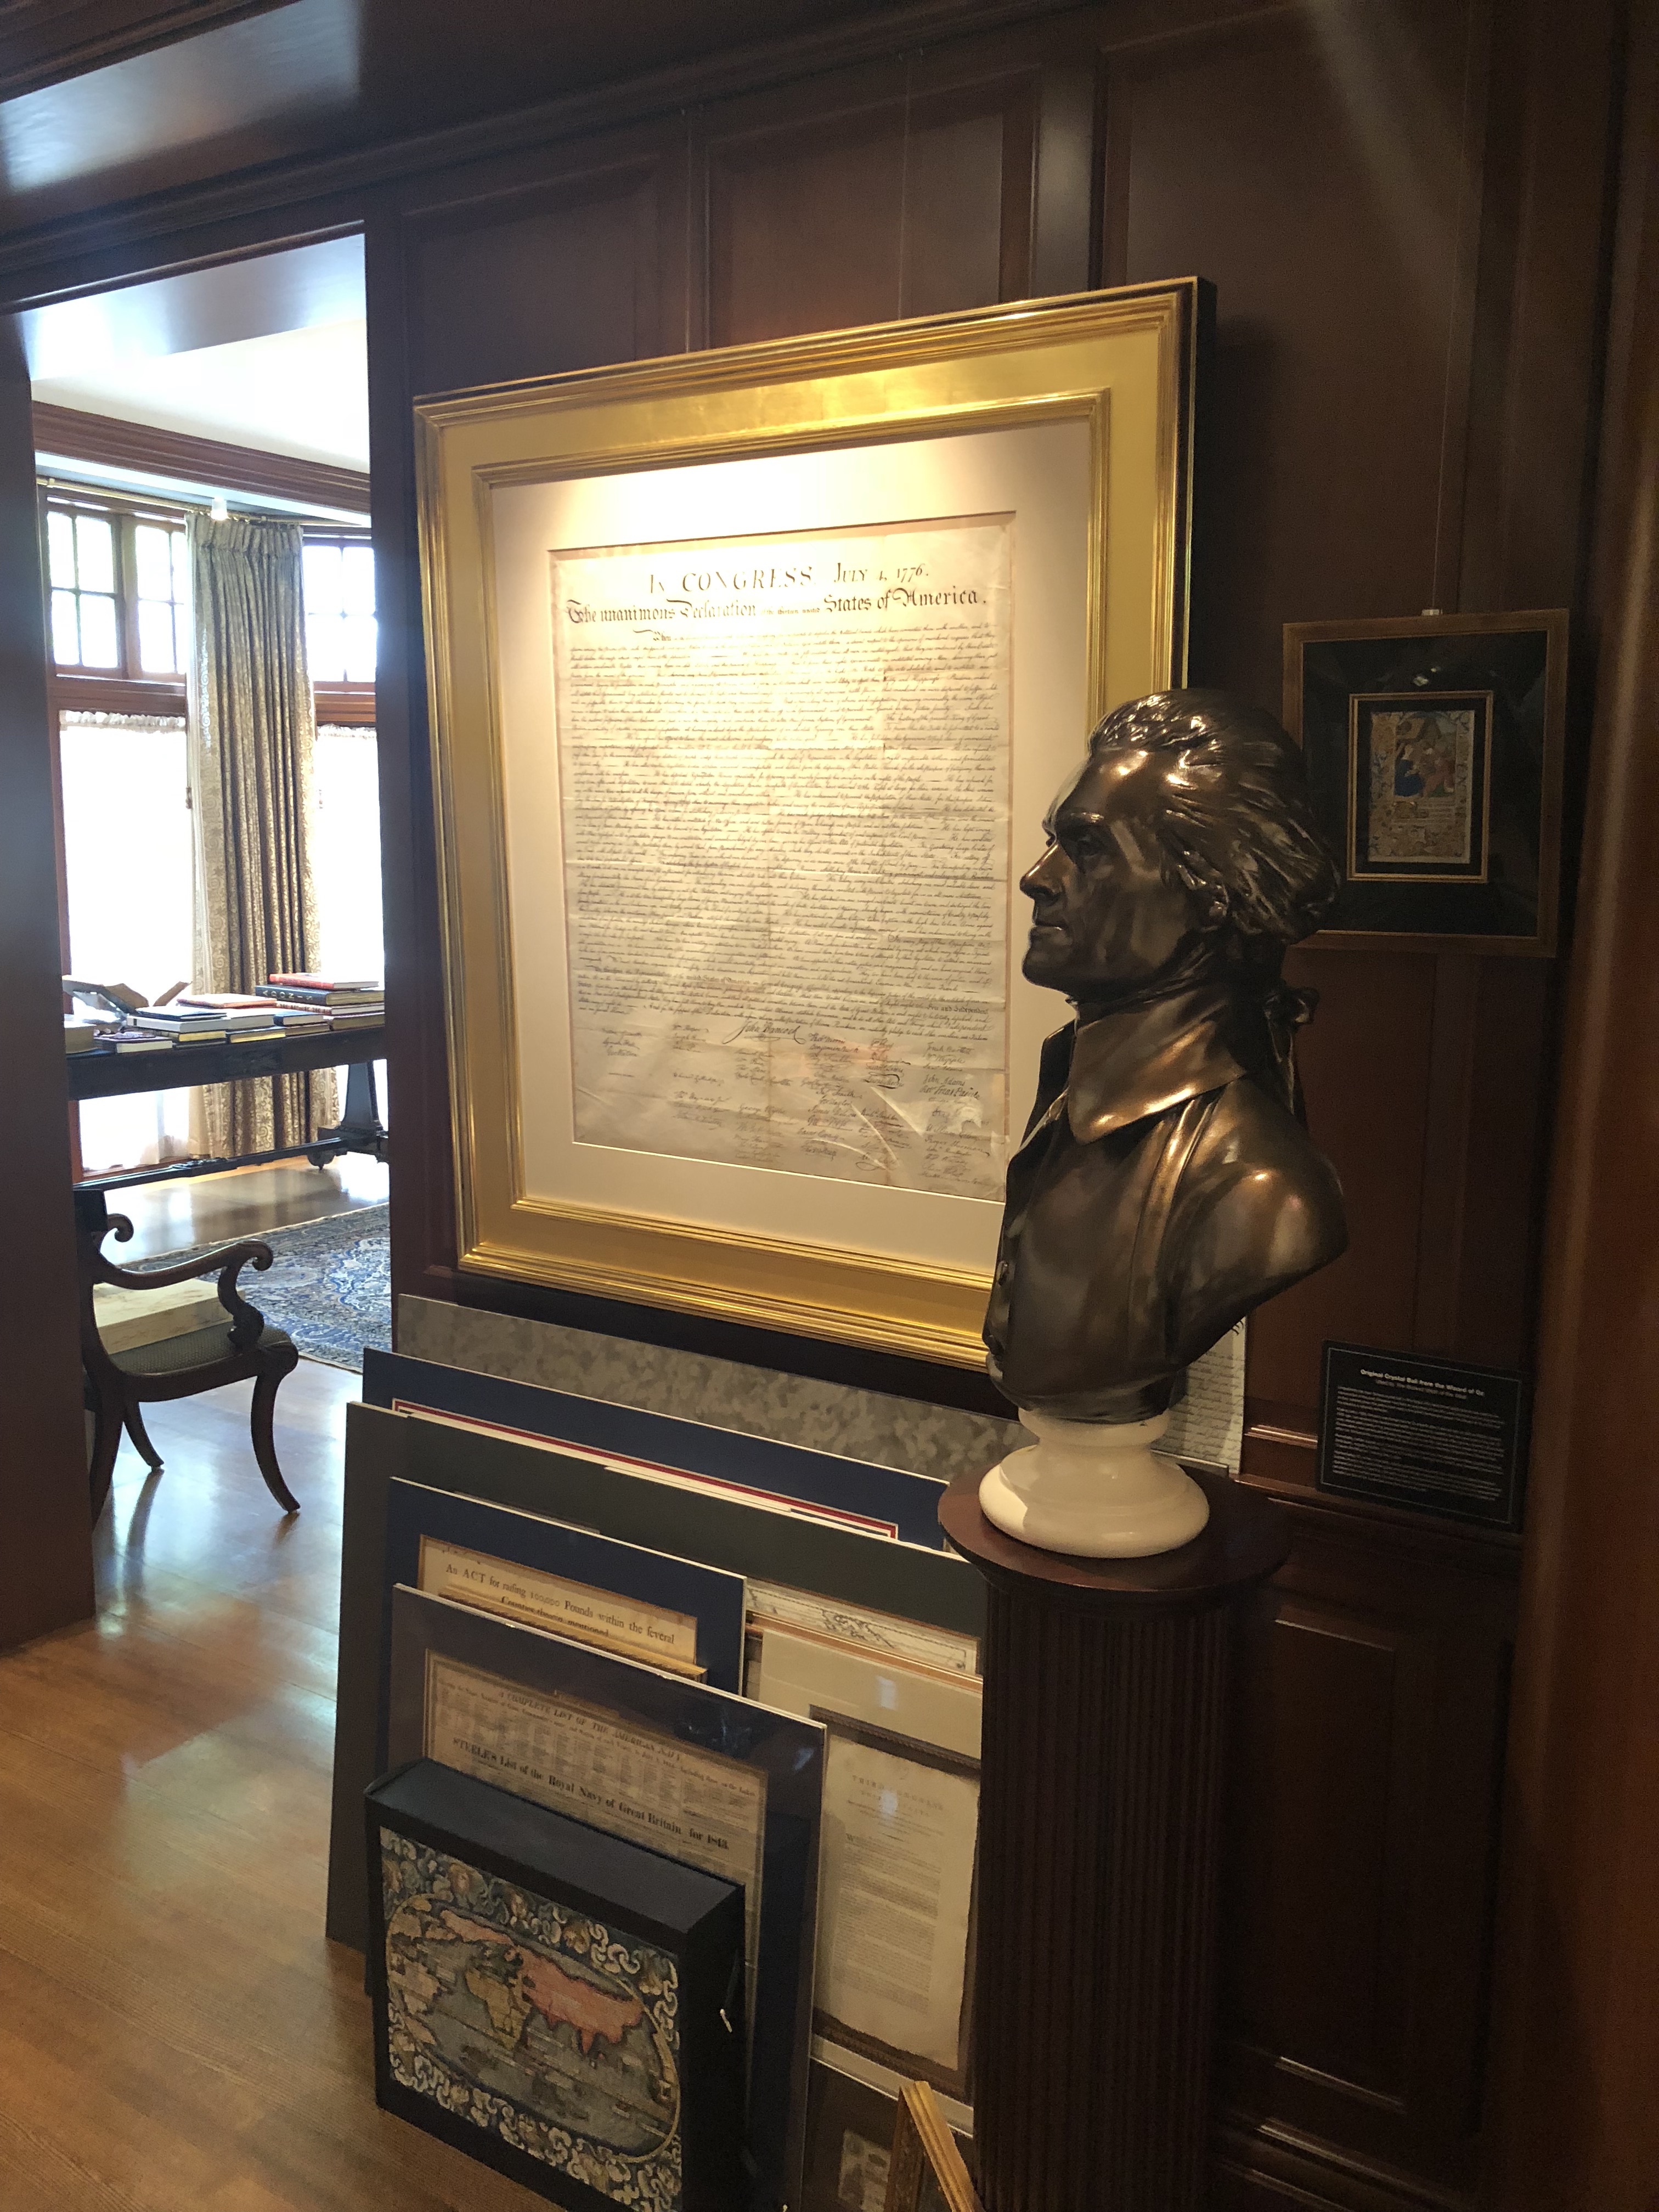 A Visit to "The Walker Library of The History of Human Imagination"